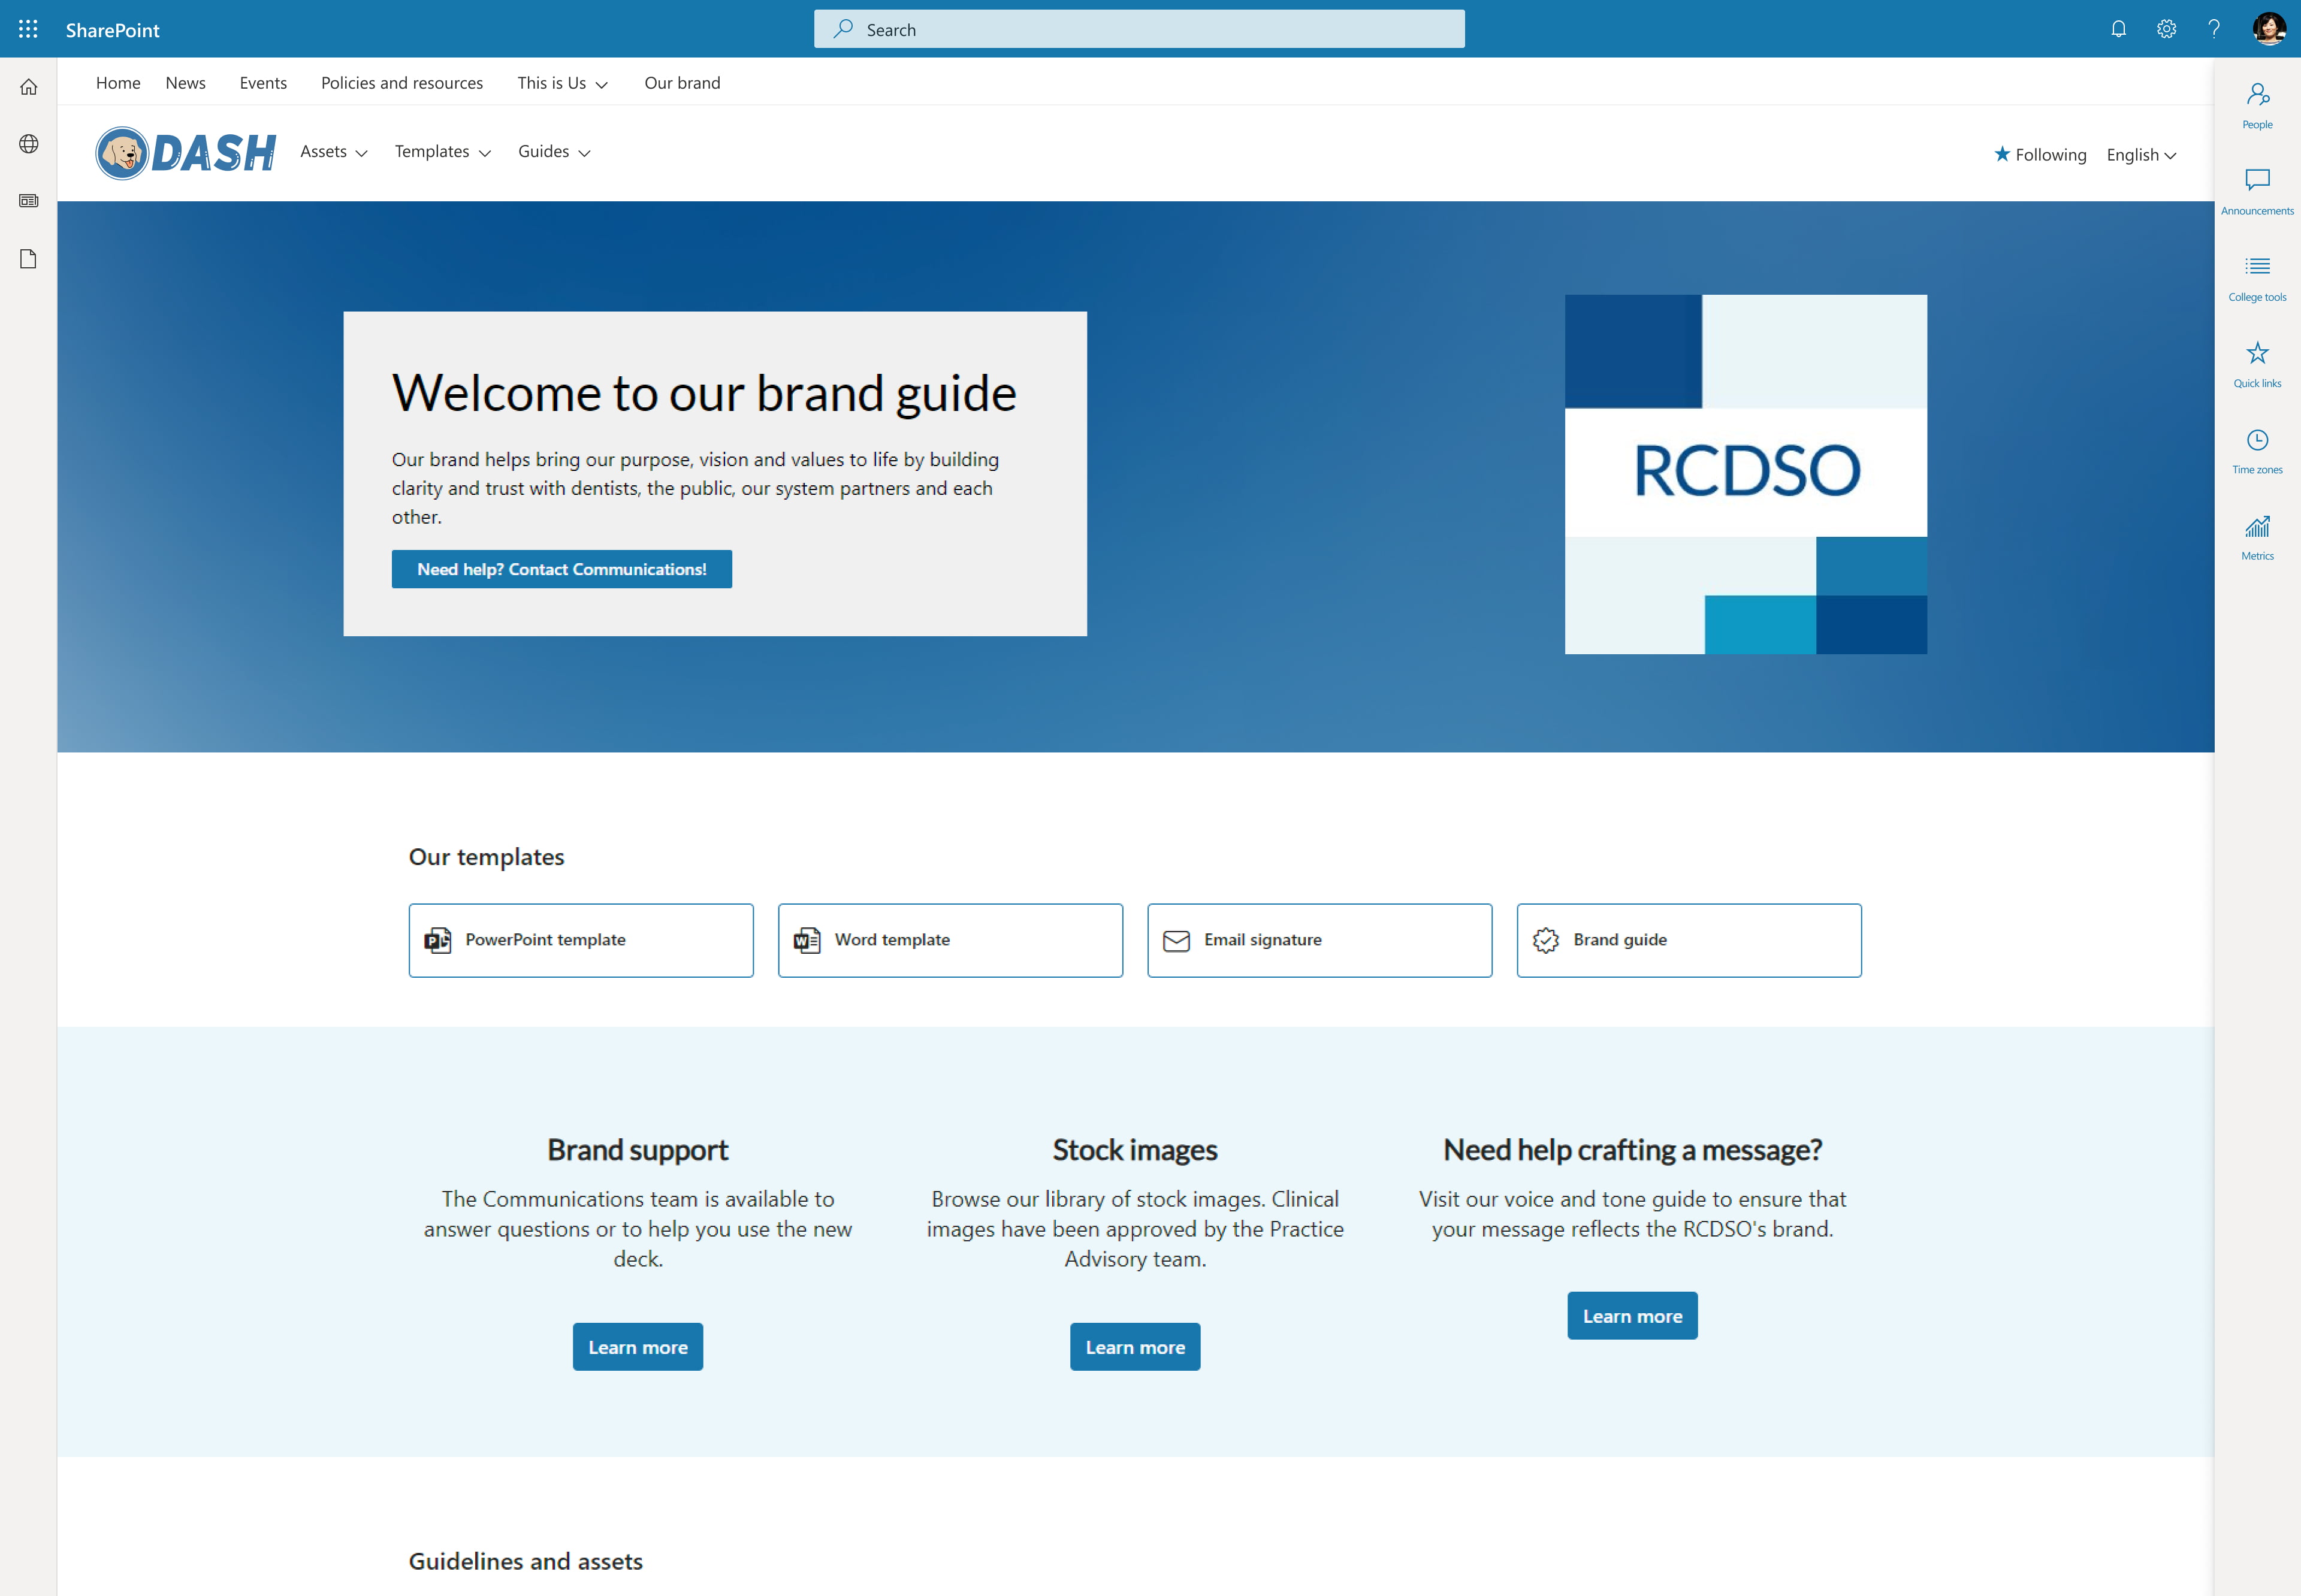 Desktop view of RCDSO's brand portal on their intranet, Dash, built on SharePoint.